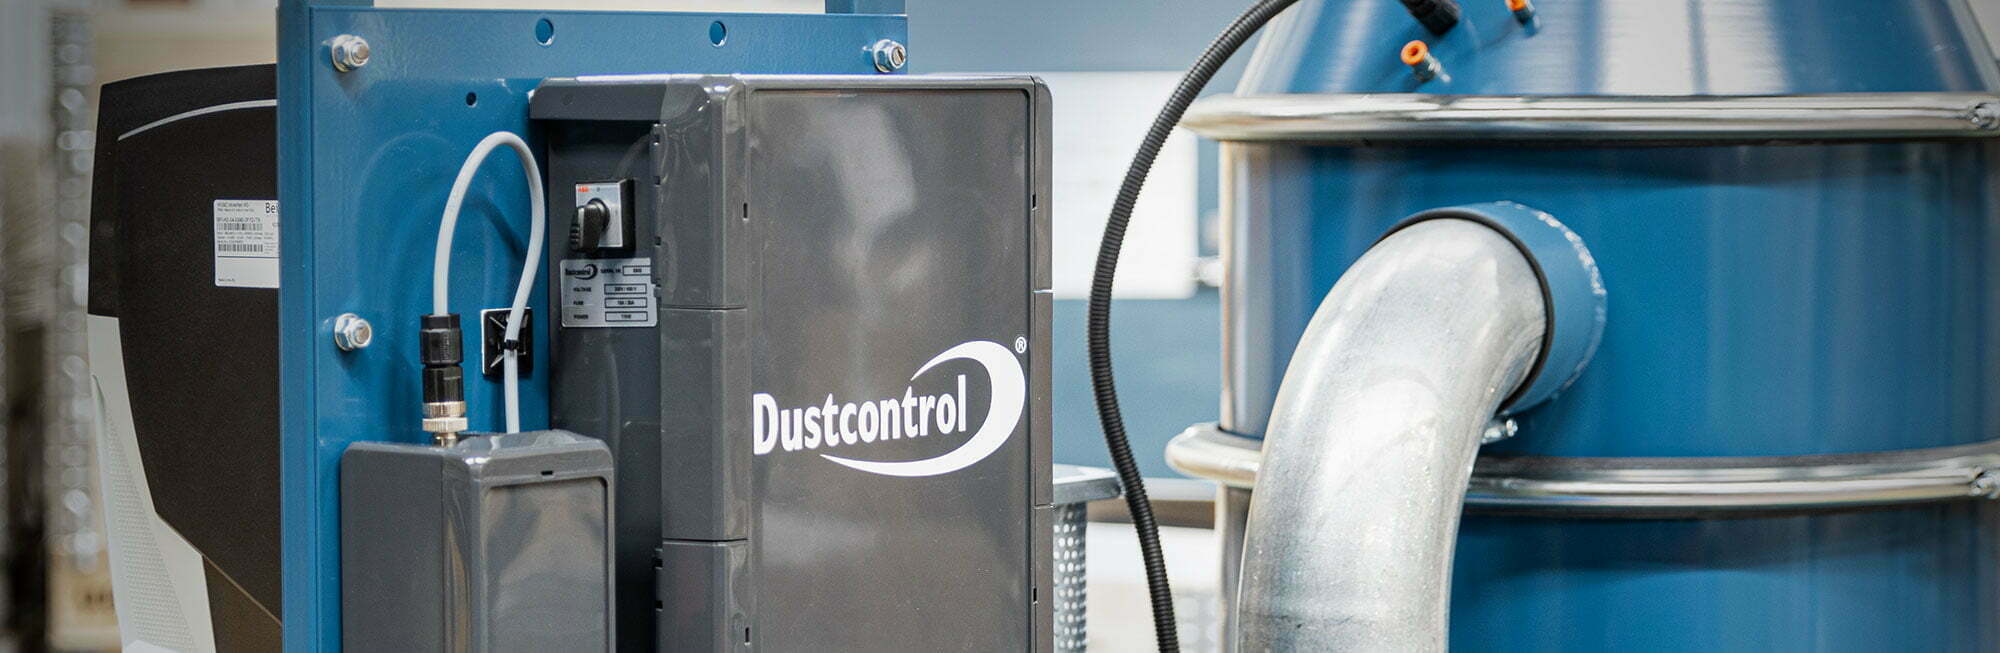 Dustcontrol Compact Vacuum Systems DC11 Module 2000x653